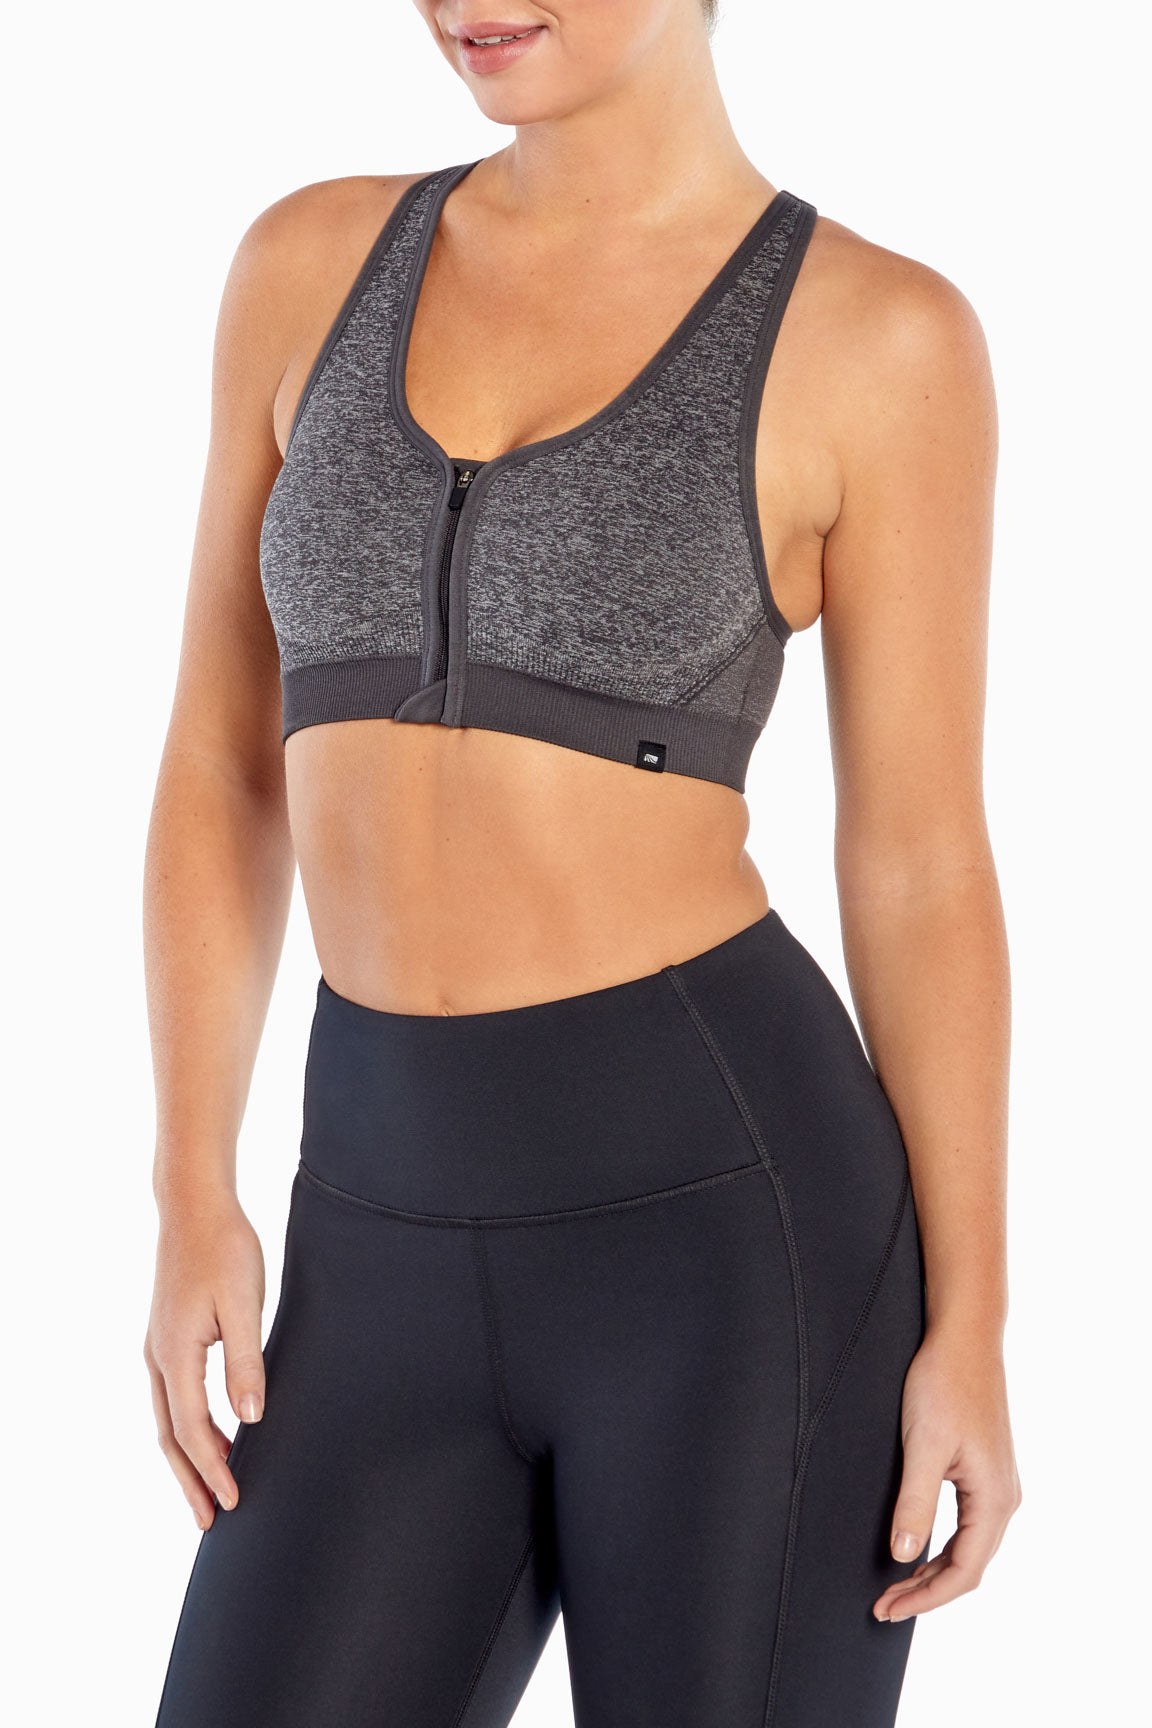 MTA Sport Women's MTA sports Bra. LATH035 Size L - $11 New With Tags - From  Julie